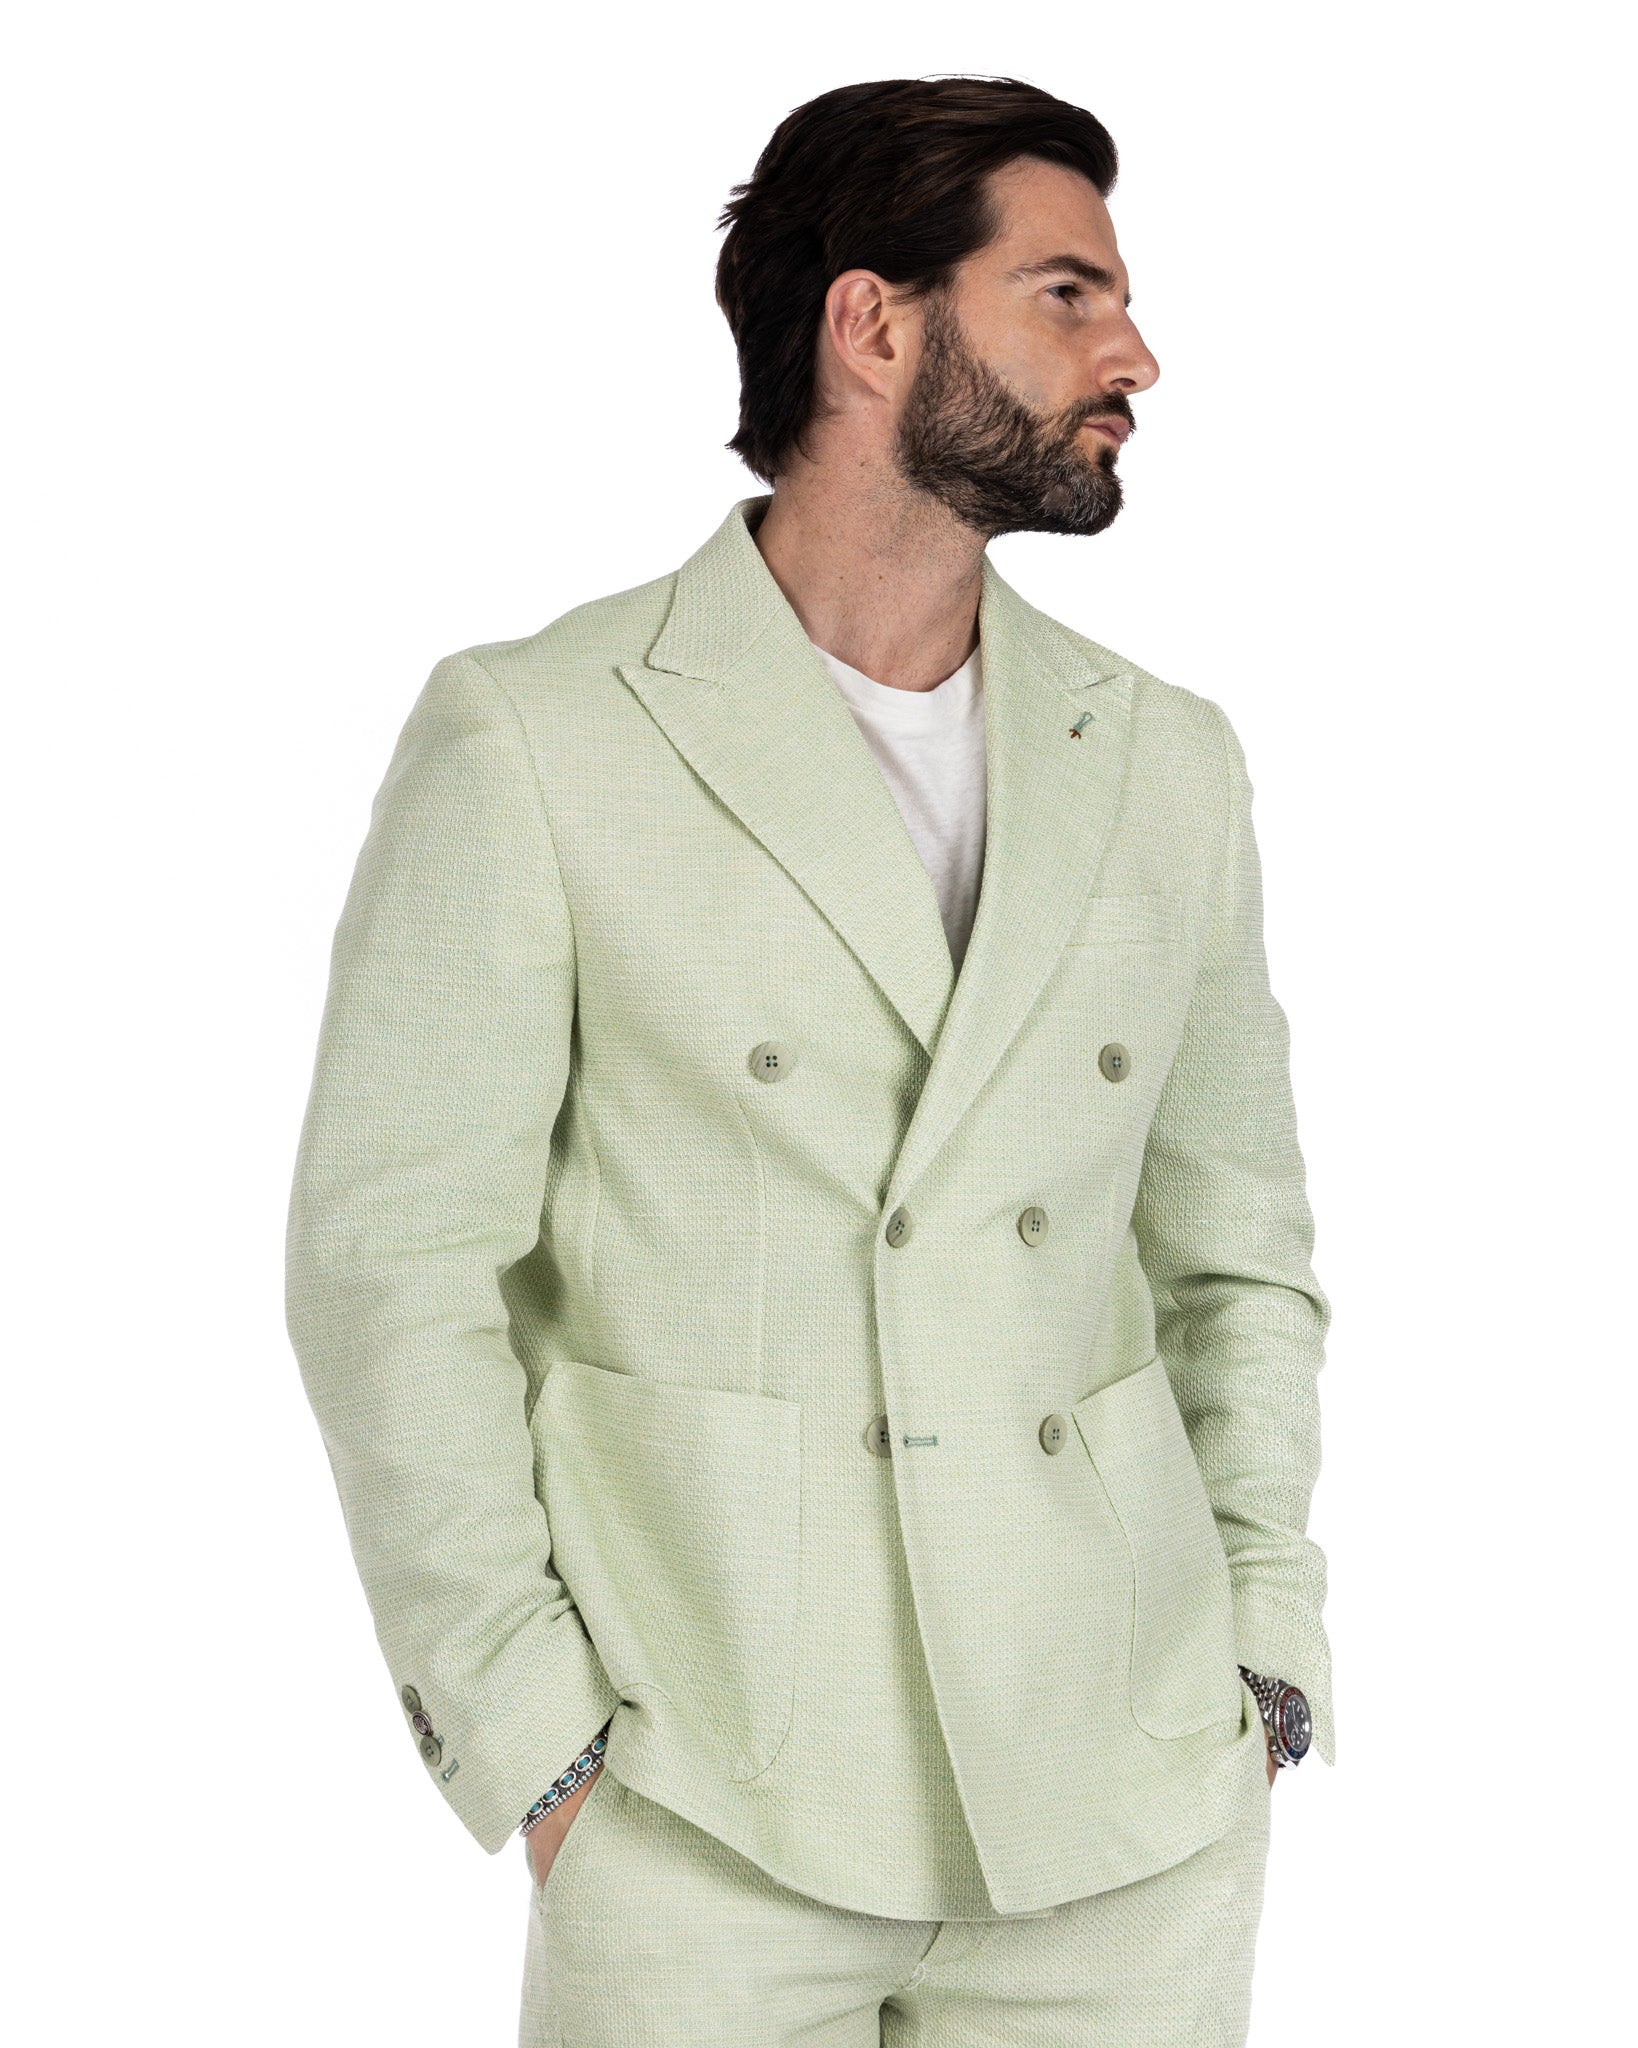 Leuca - green double-breasted jacket